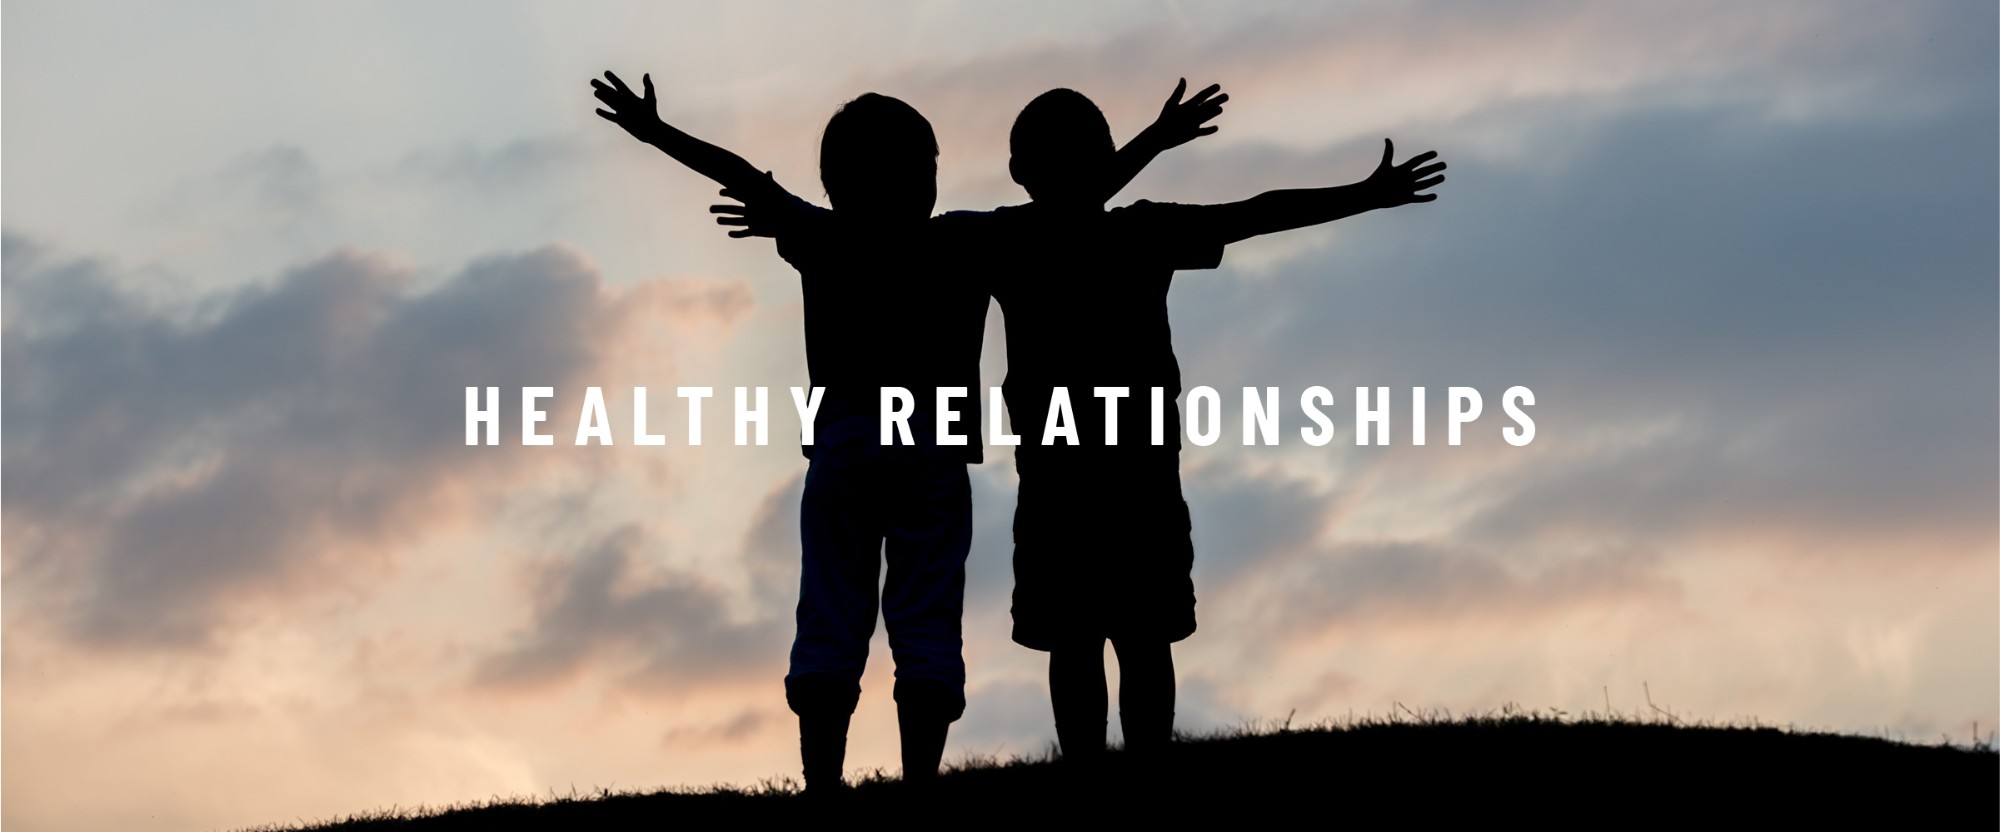 Image: Shadow of two children together Text: Healthy relationships